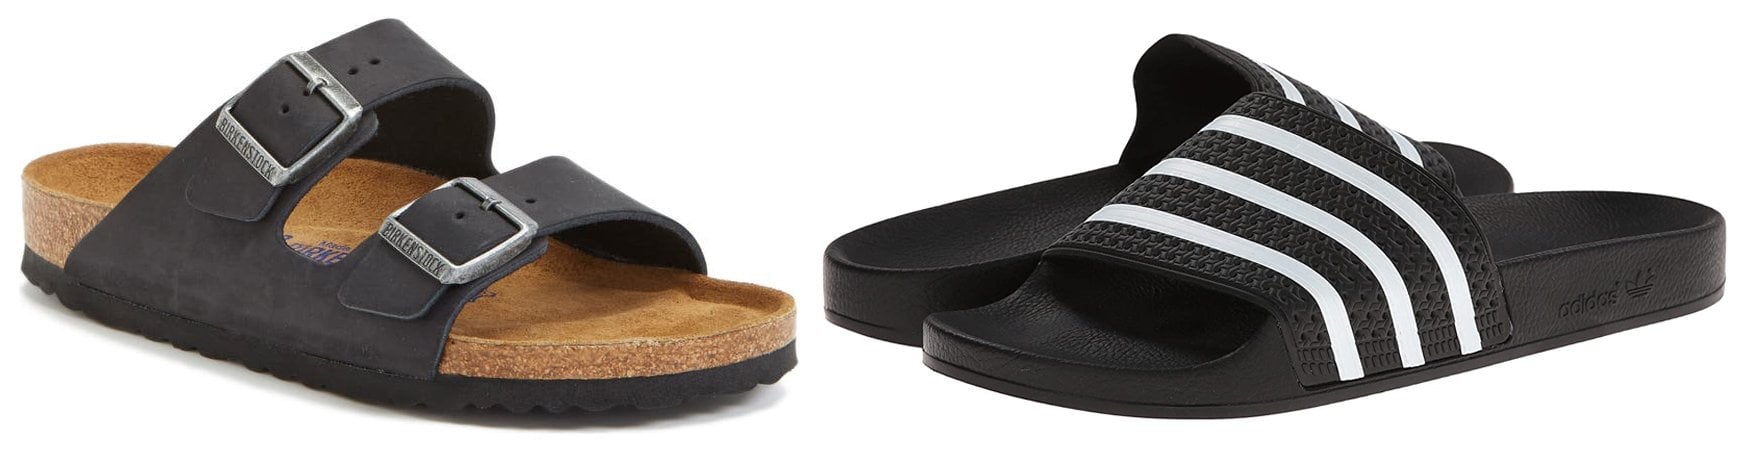 The slide sandal is a minimal and highly comfortable athleisure footwear choice